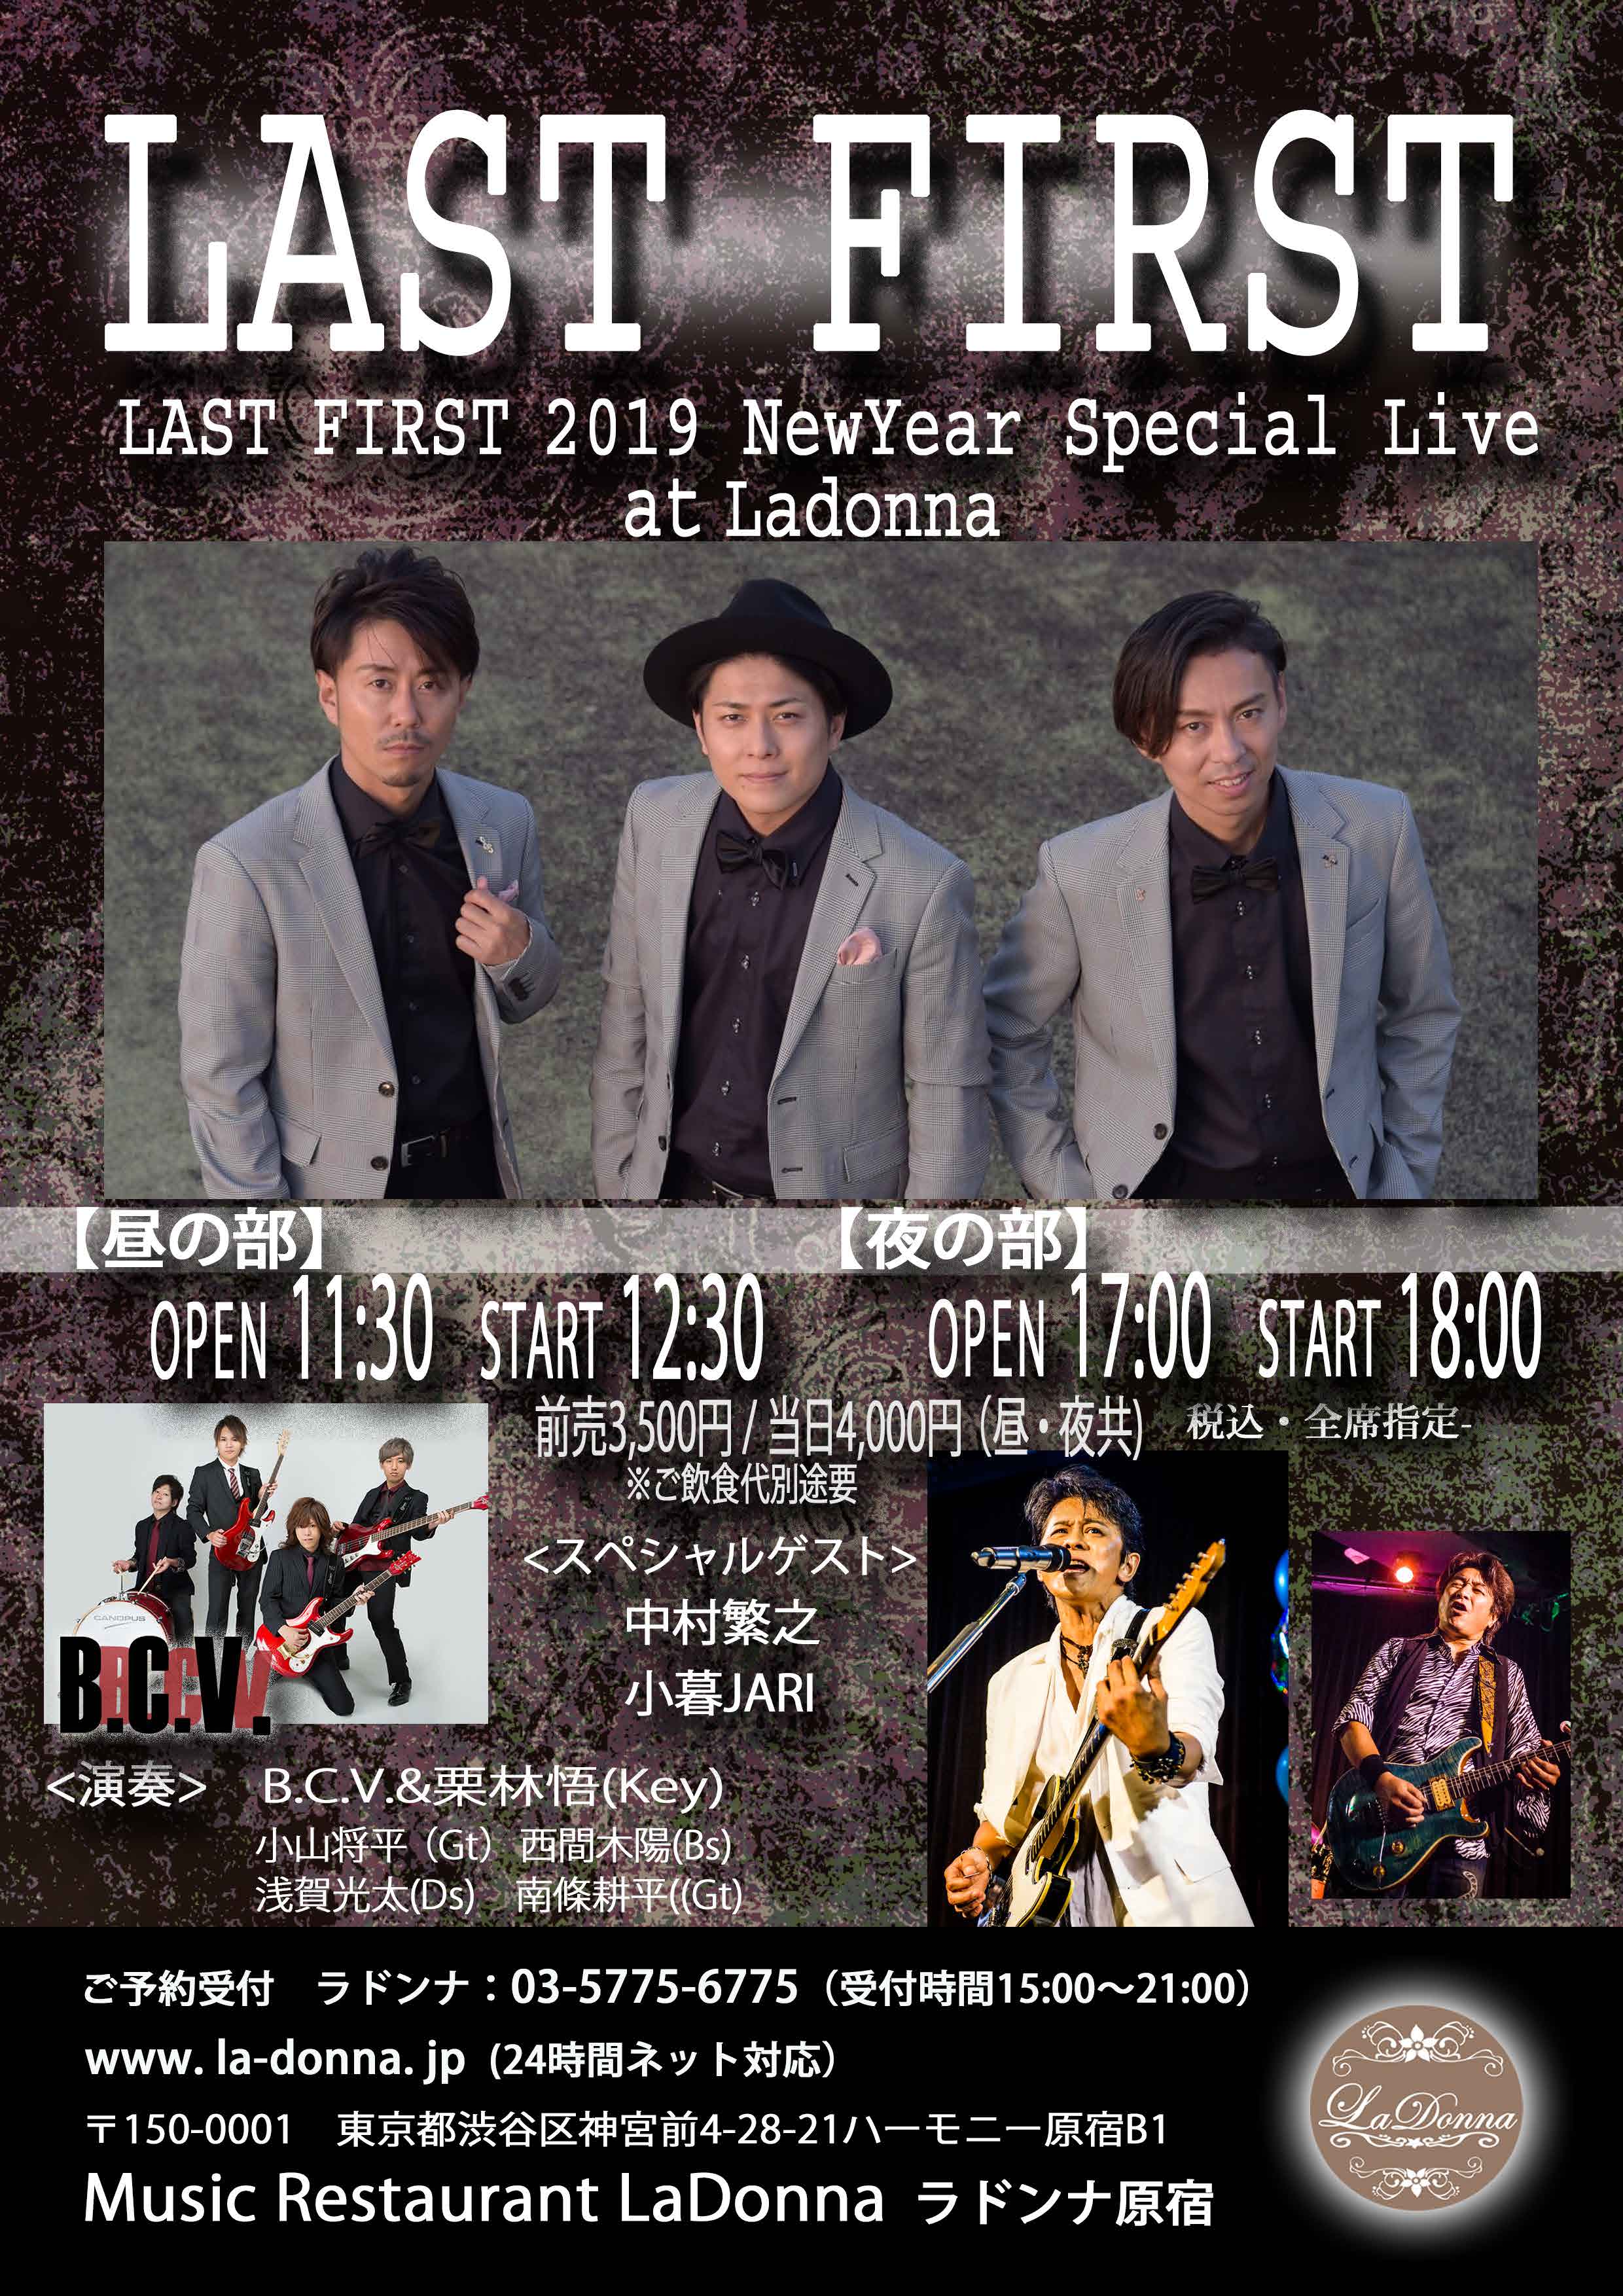 LAST FIRST 2019 NewYear Special Live